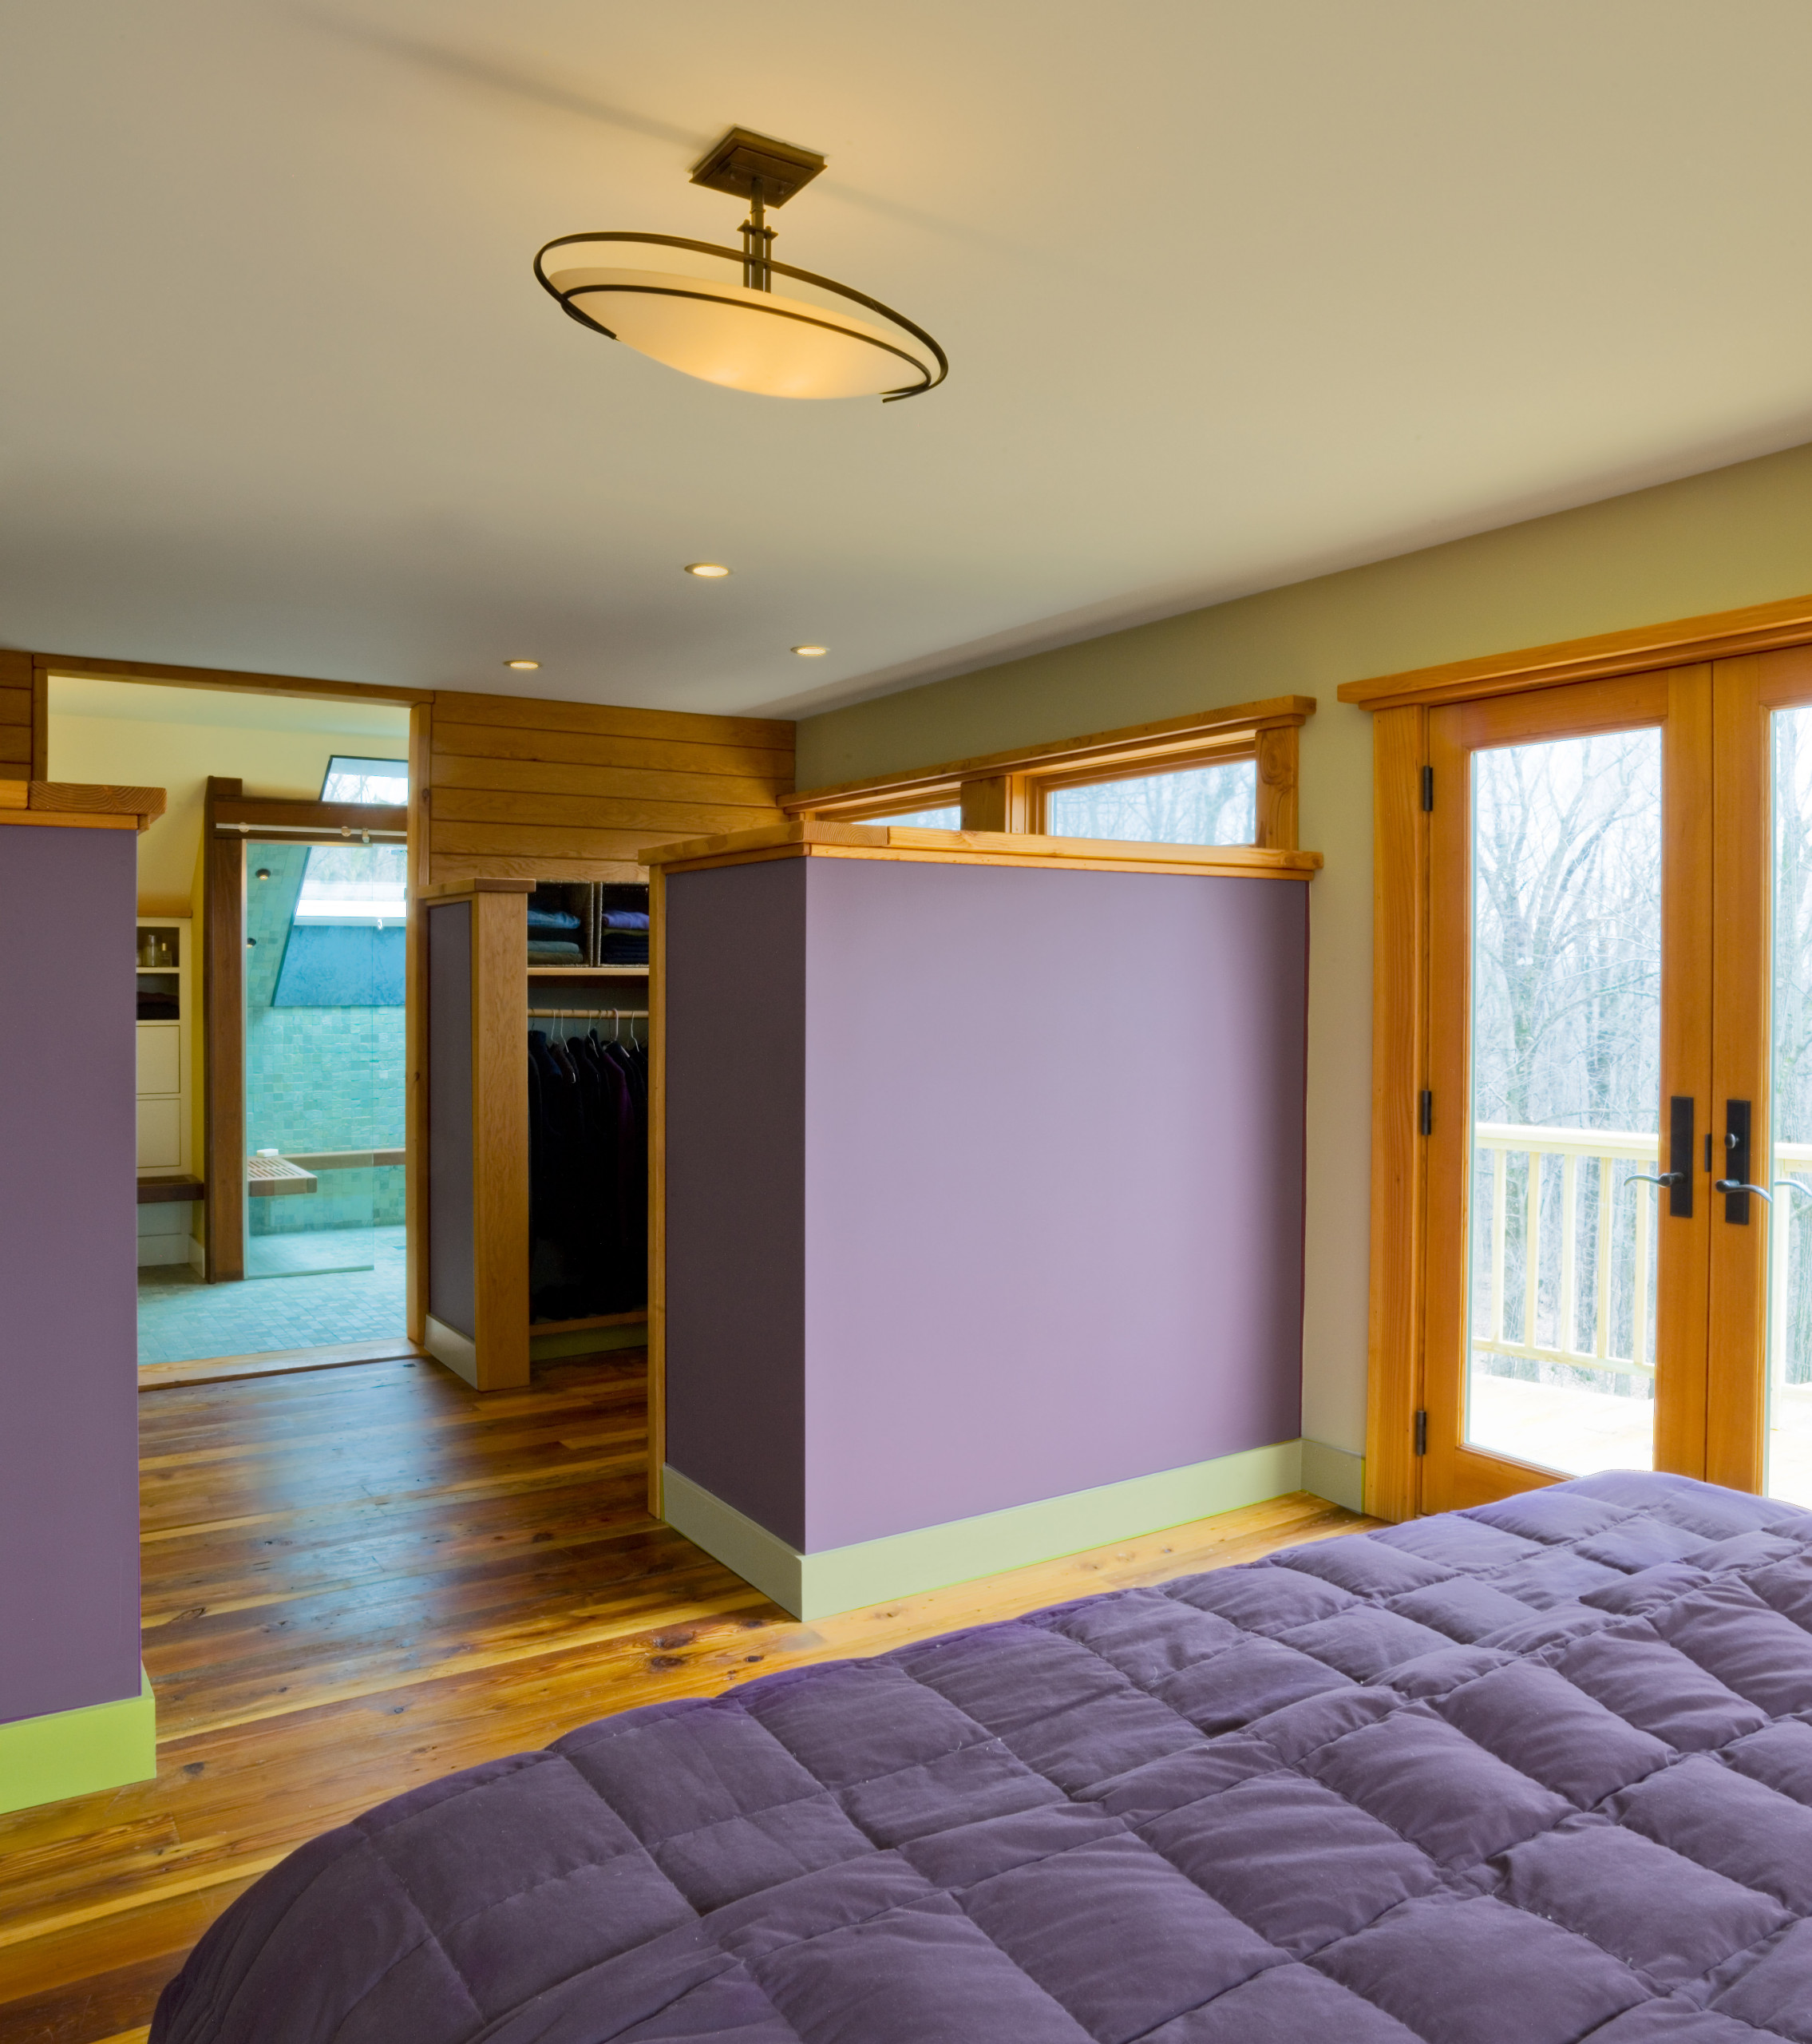 75 Beautiful Rustic Bedroom With Purple Walls Pictures Ideas November 2020 Houzz